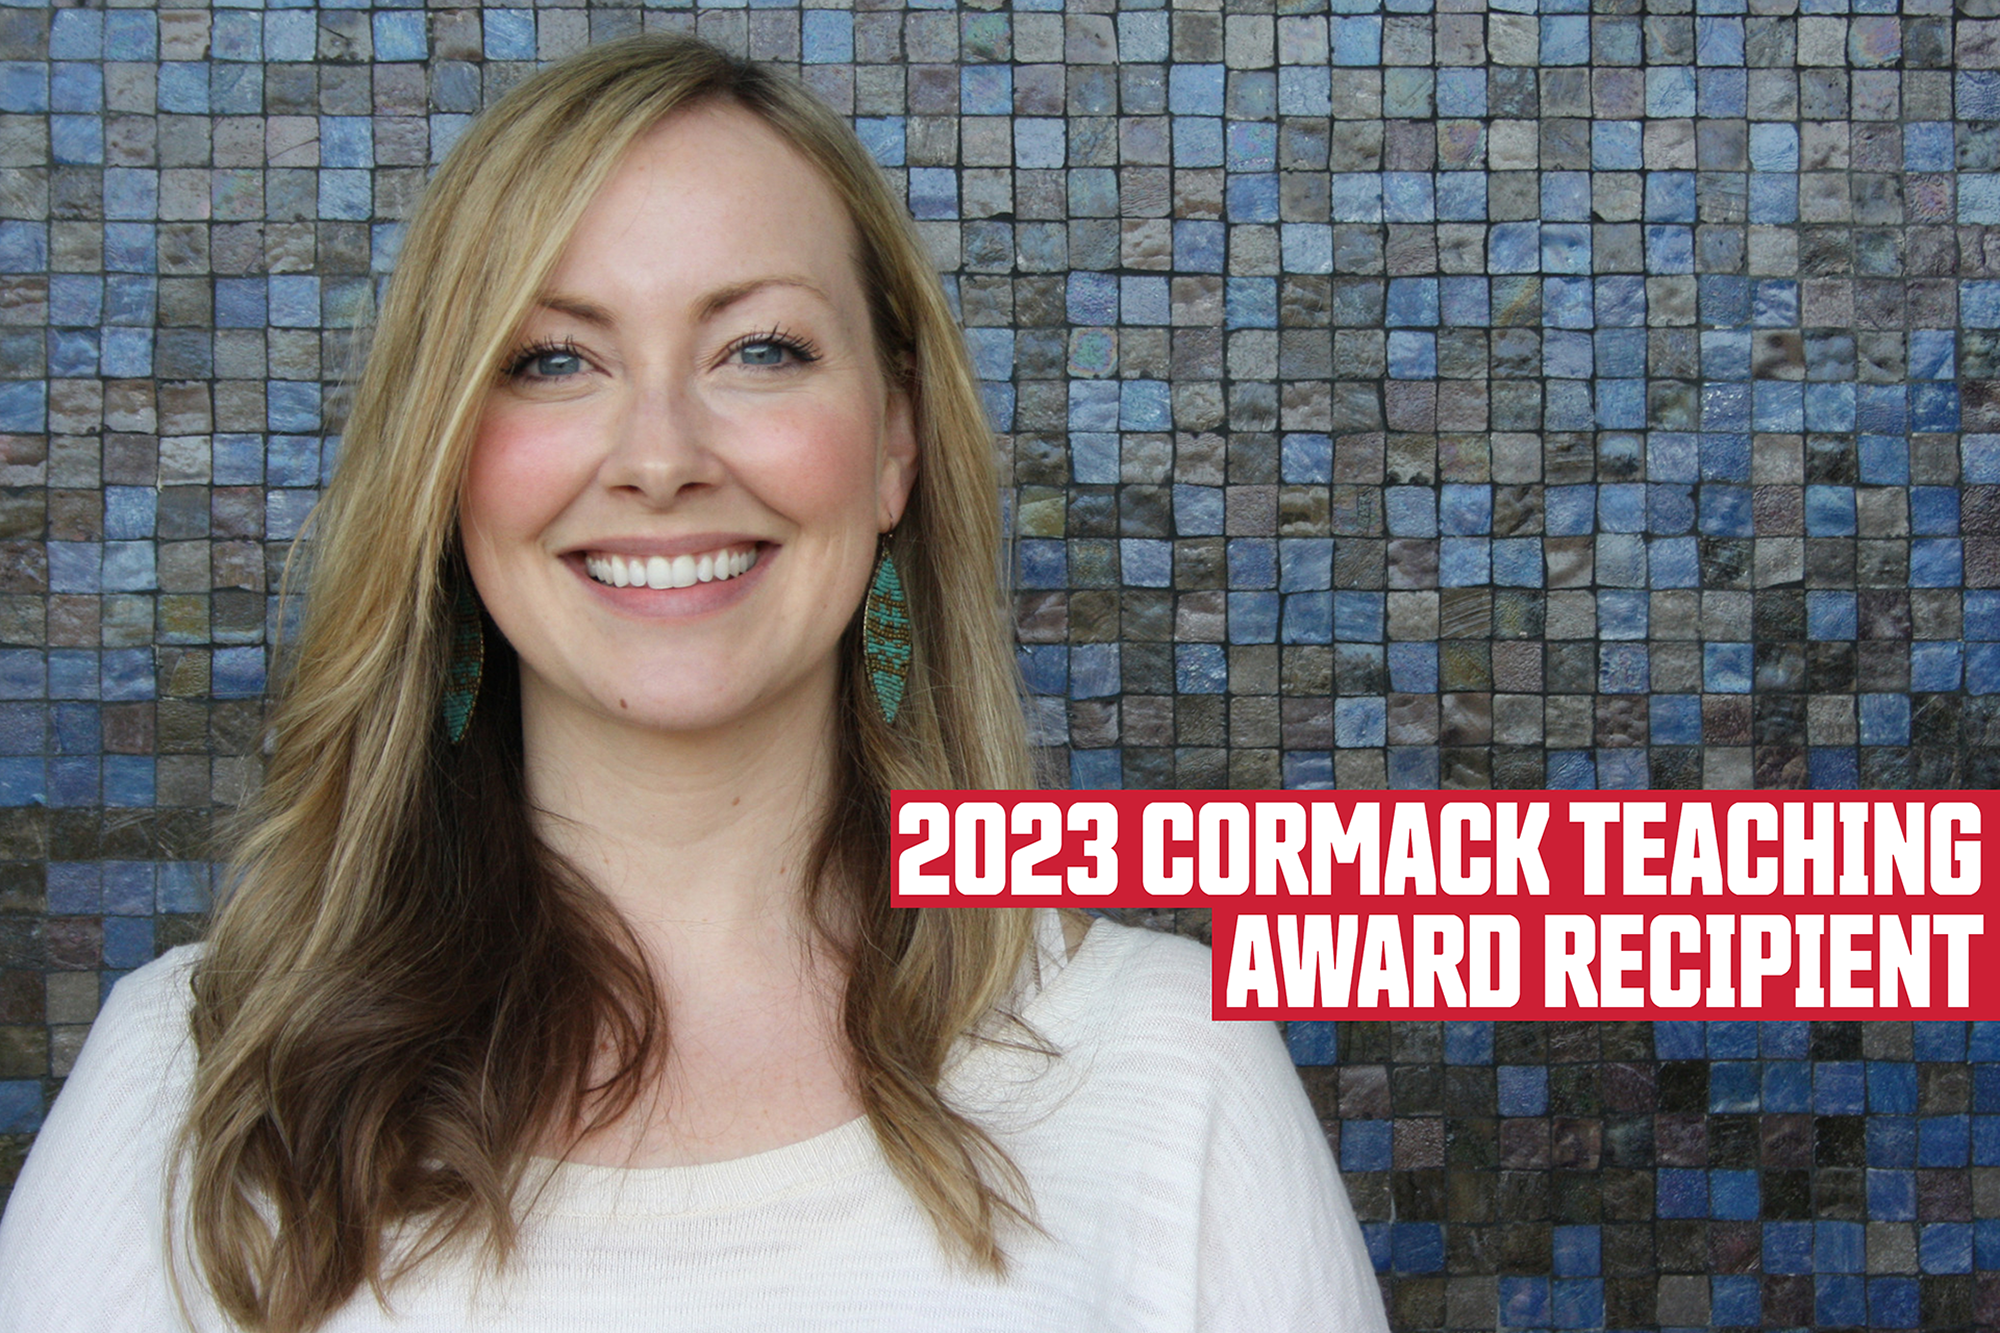 2023 Cormack Teaching Award Recipient; Photo: Coleman Nye, a smiling woman with blonde hair, standing in front of a tiled wall